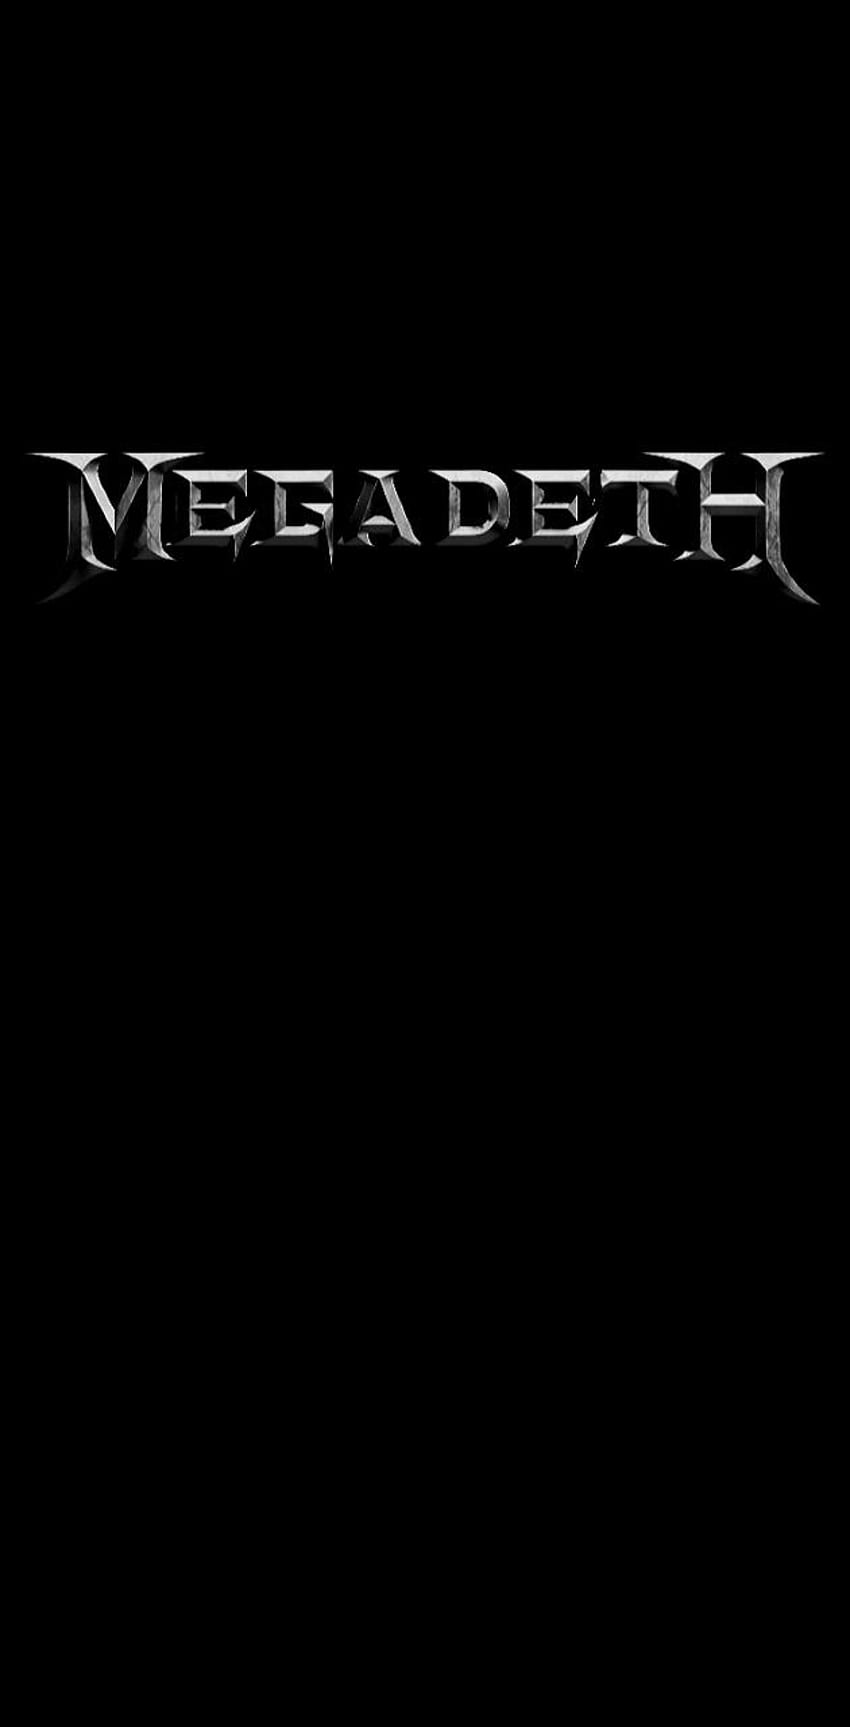 50 Megadeth HD Wallpapers and Backgrounds